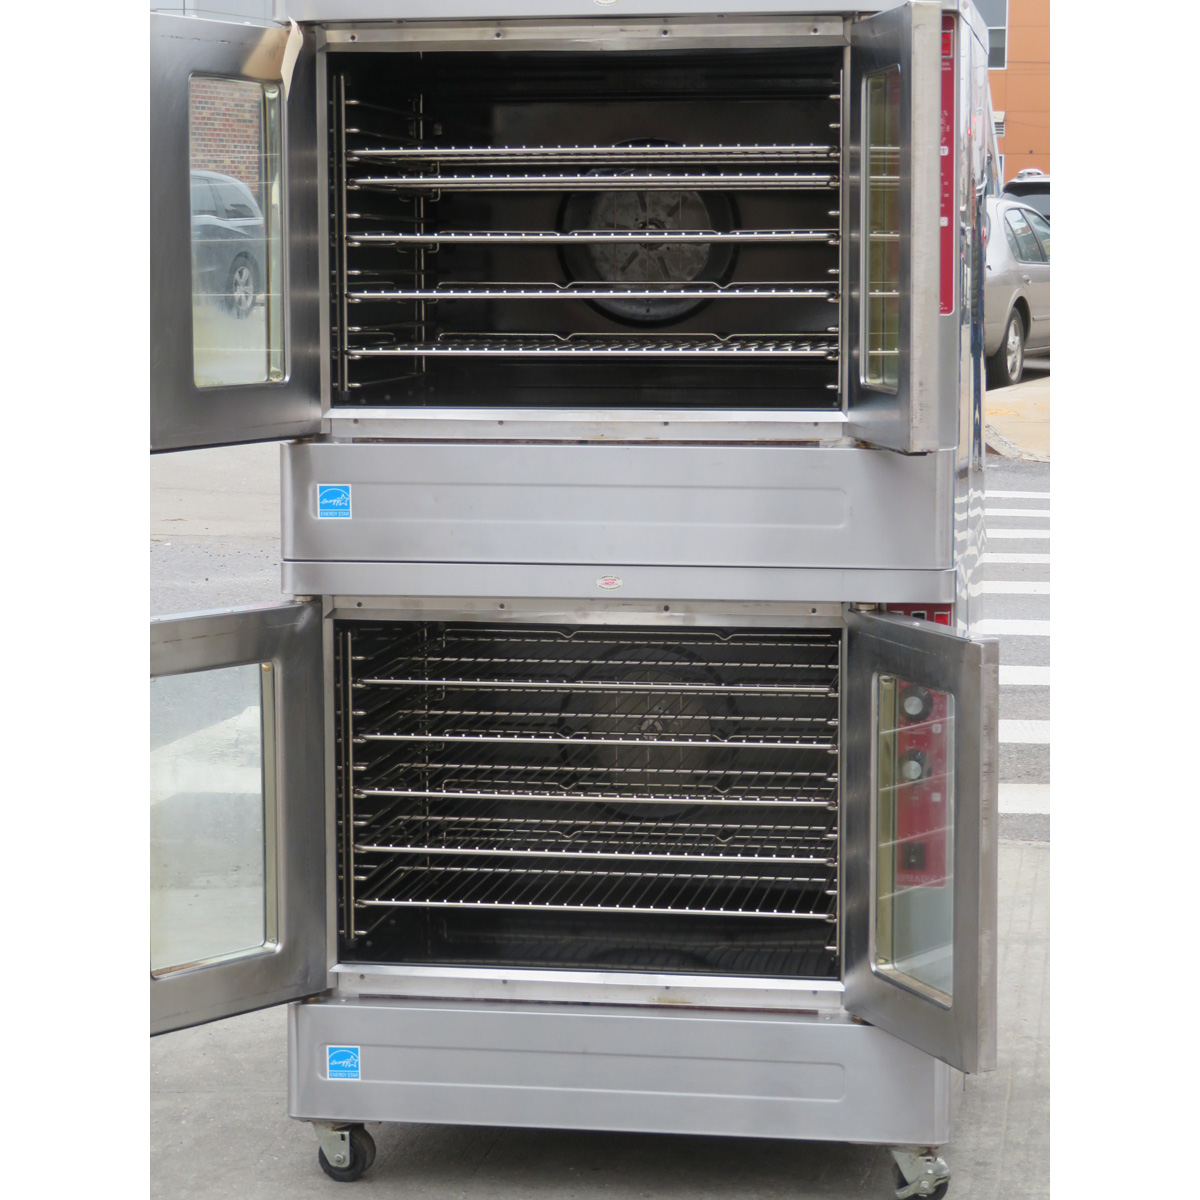 Blodgett ZEPHAIRE-100-E Double Standard Depth Electric Convection Oven, 480 Volt, Used Great Condition image 3